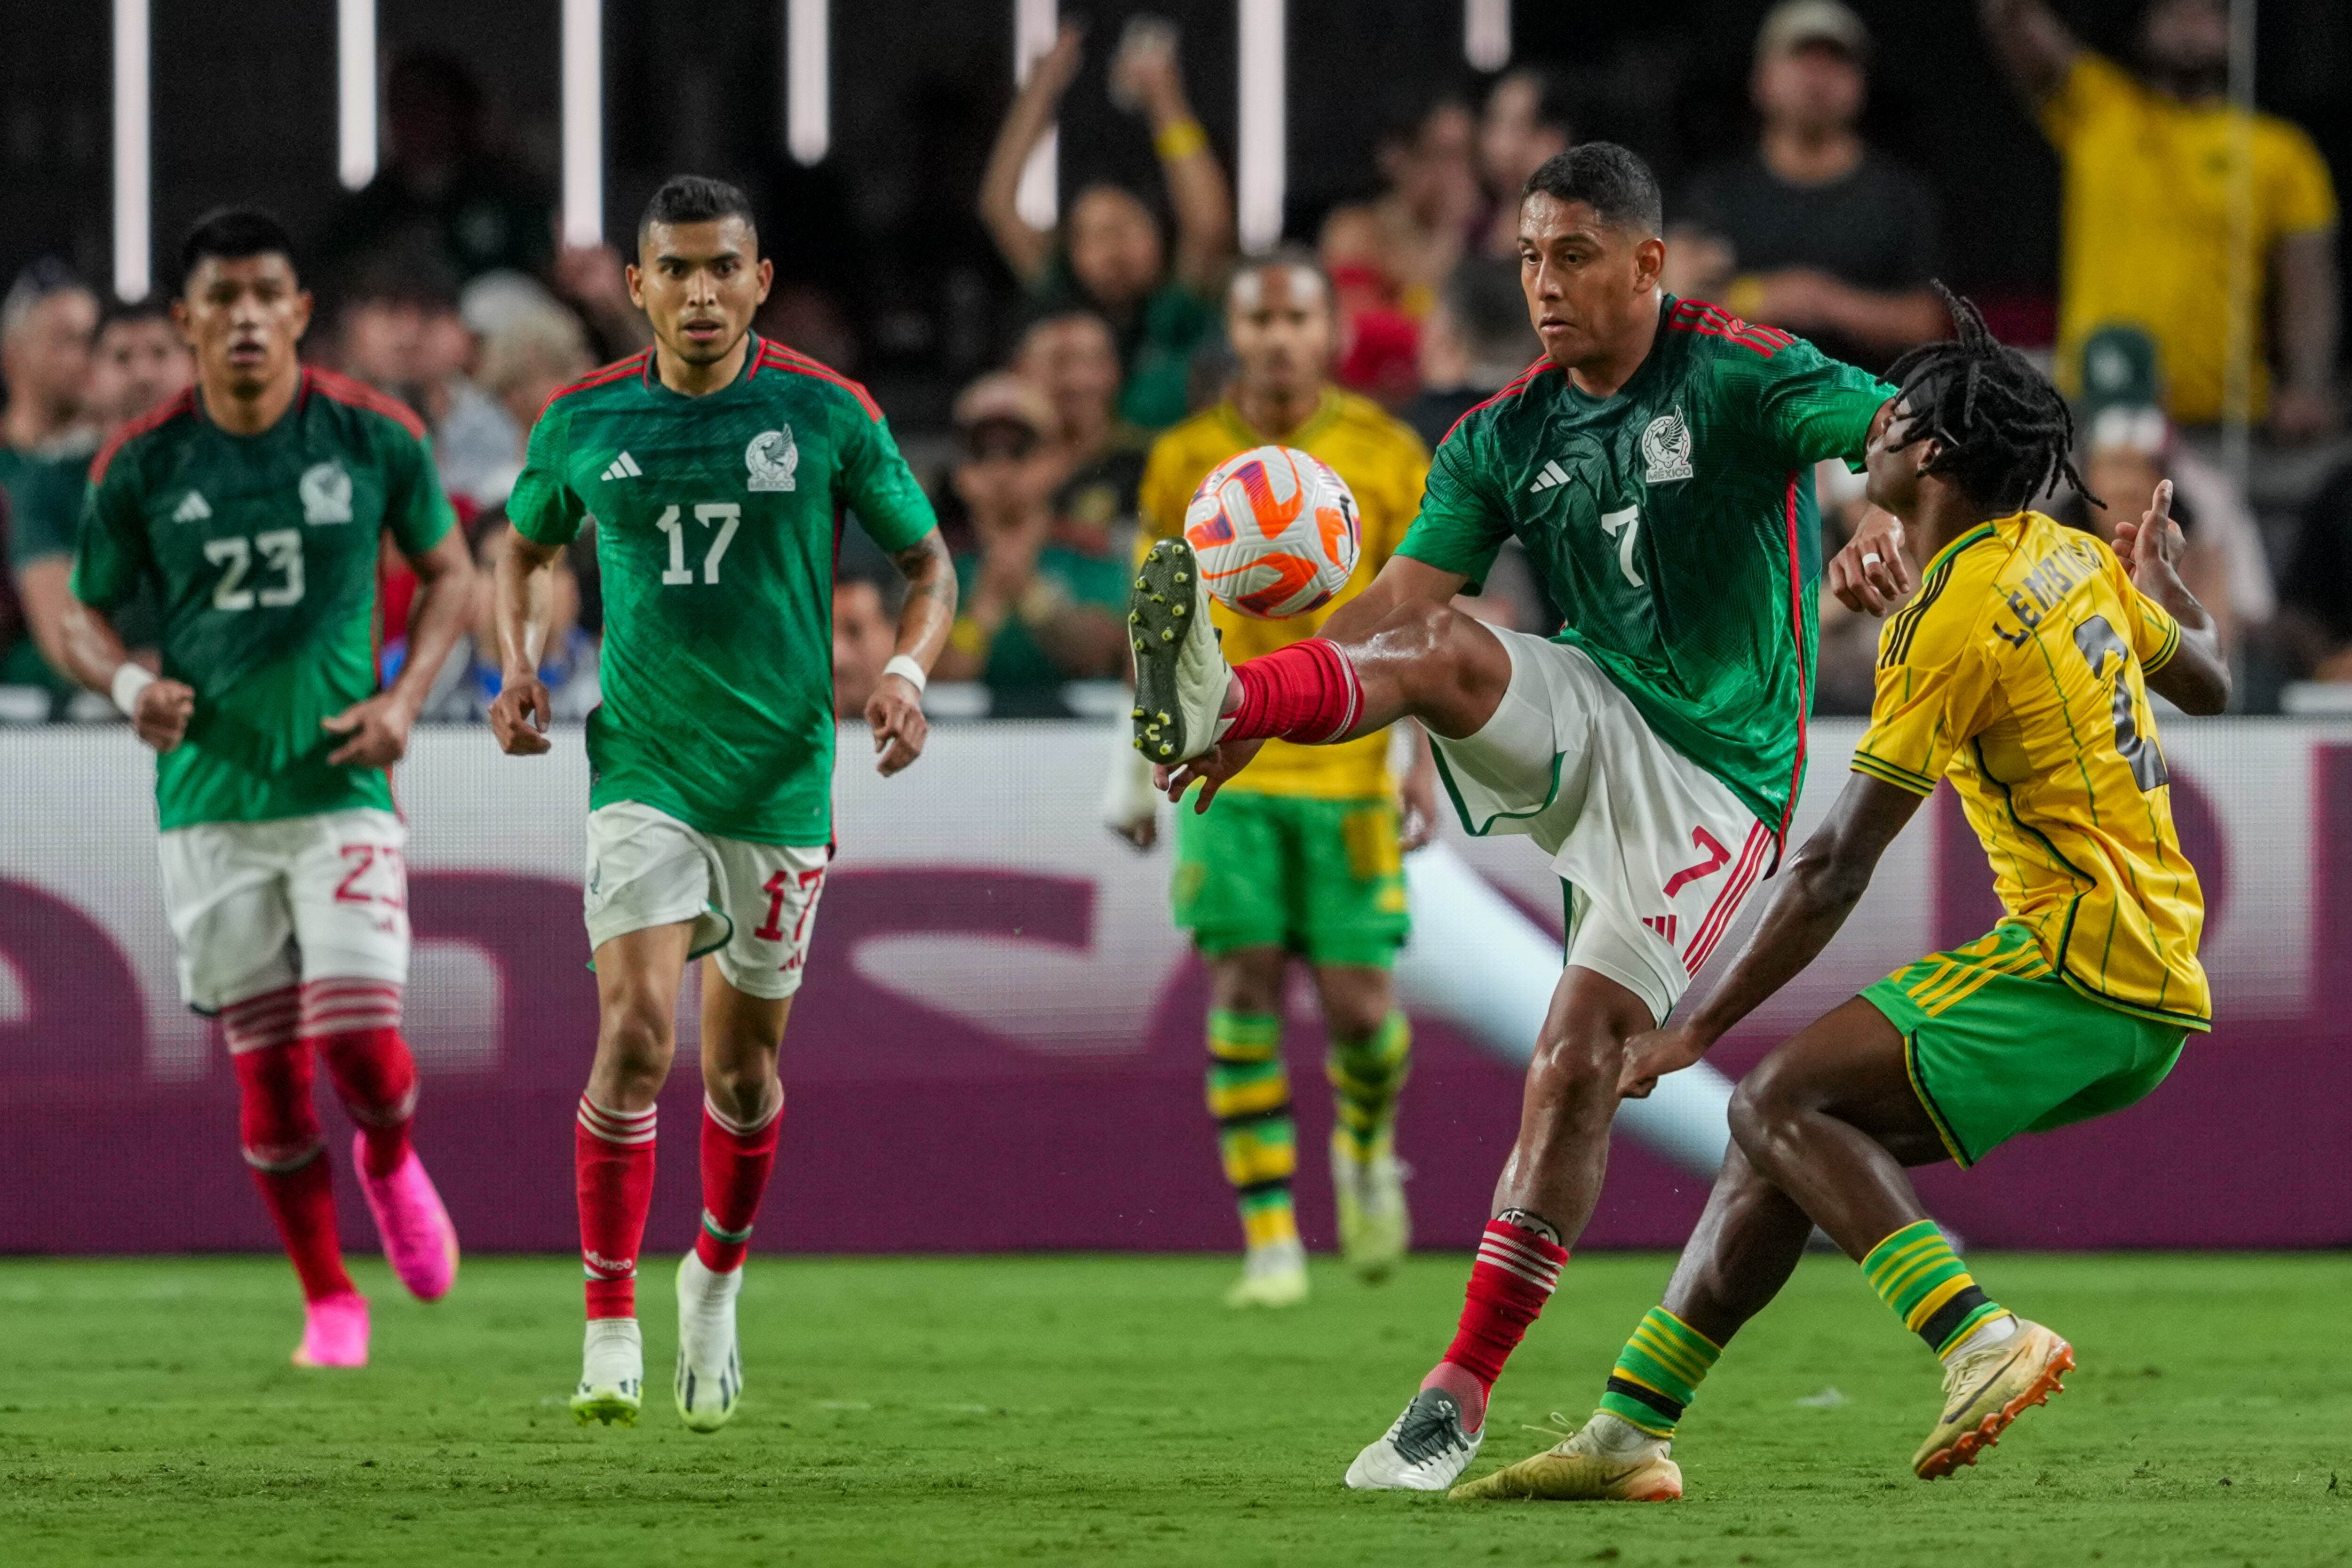 Mexico's Luis Romo steals a ball in a match against Jamaica in Las Vegas, USA, in July 2023.